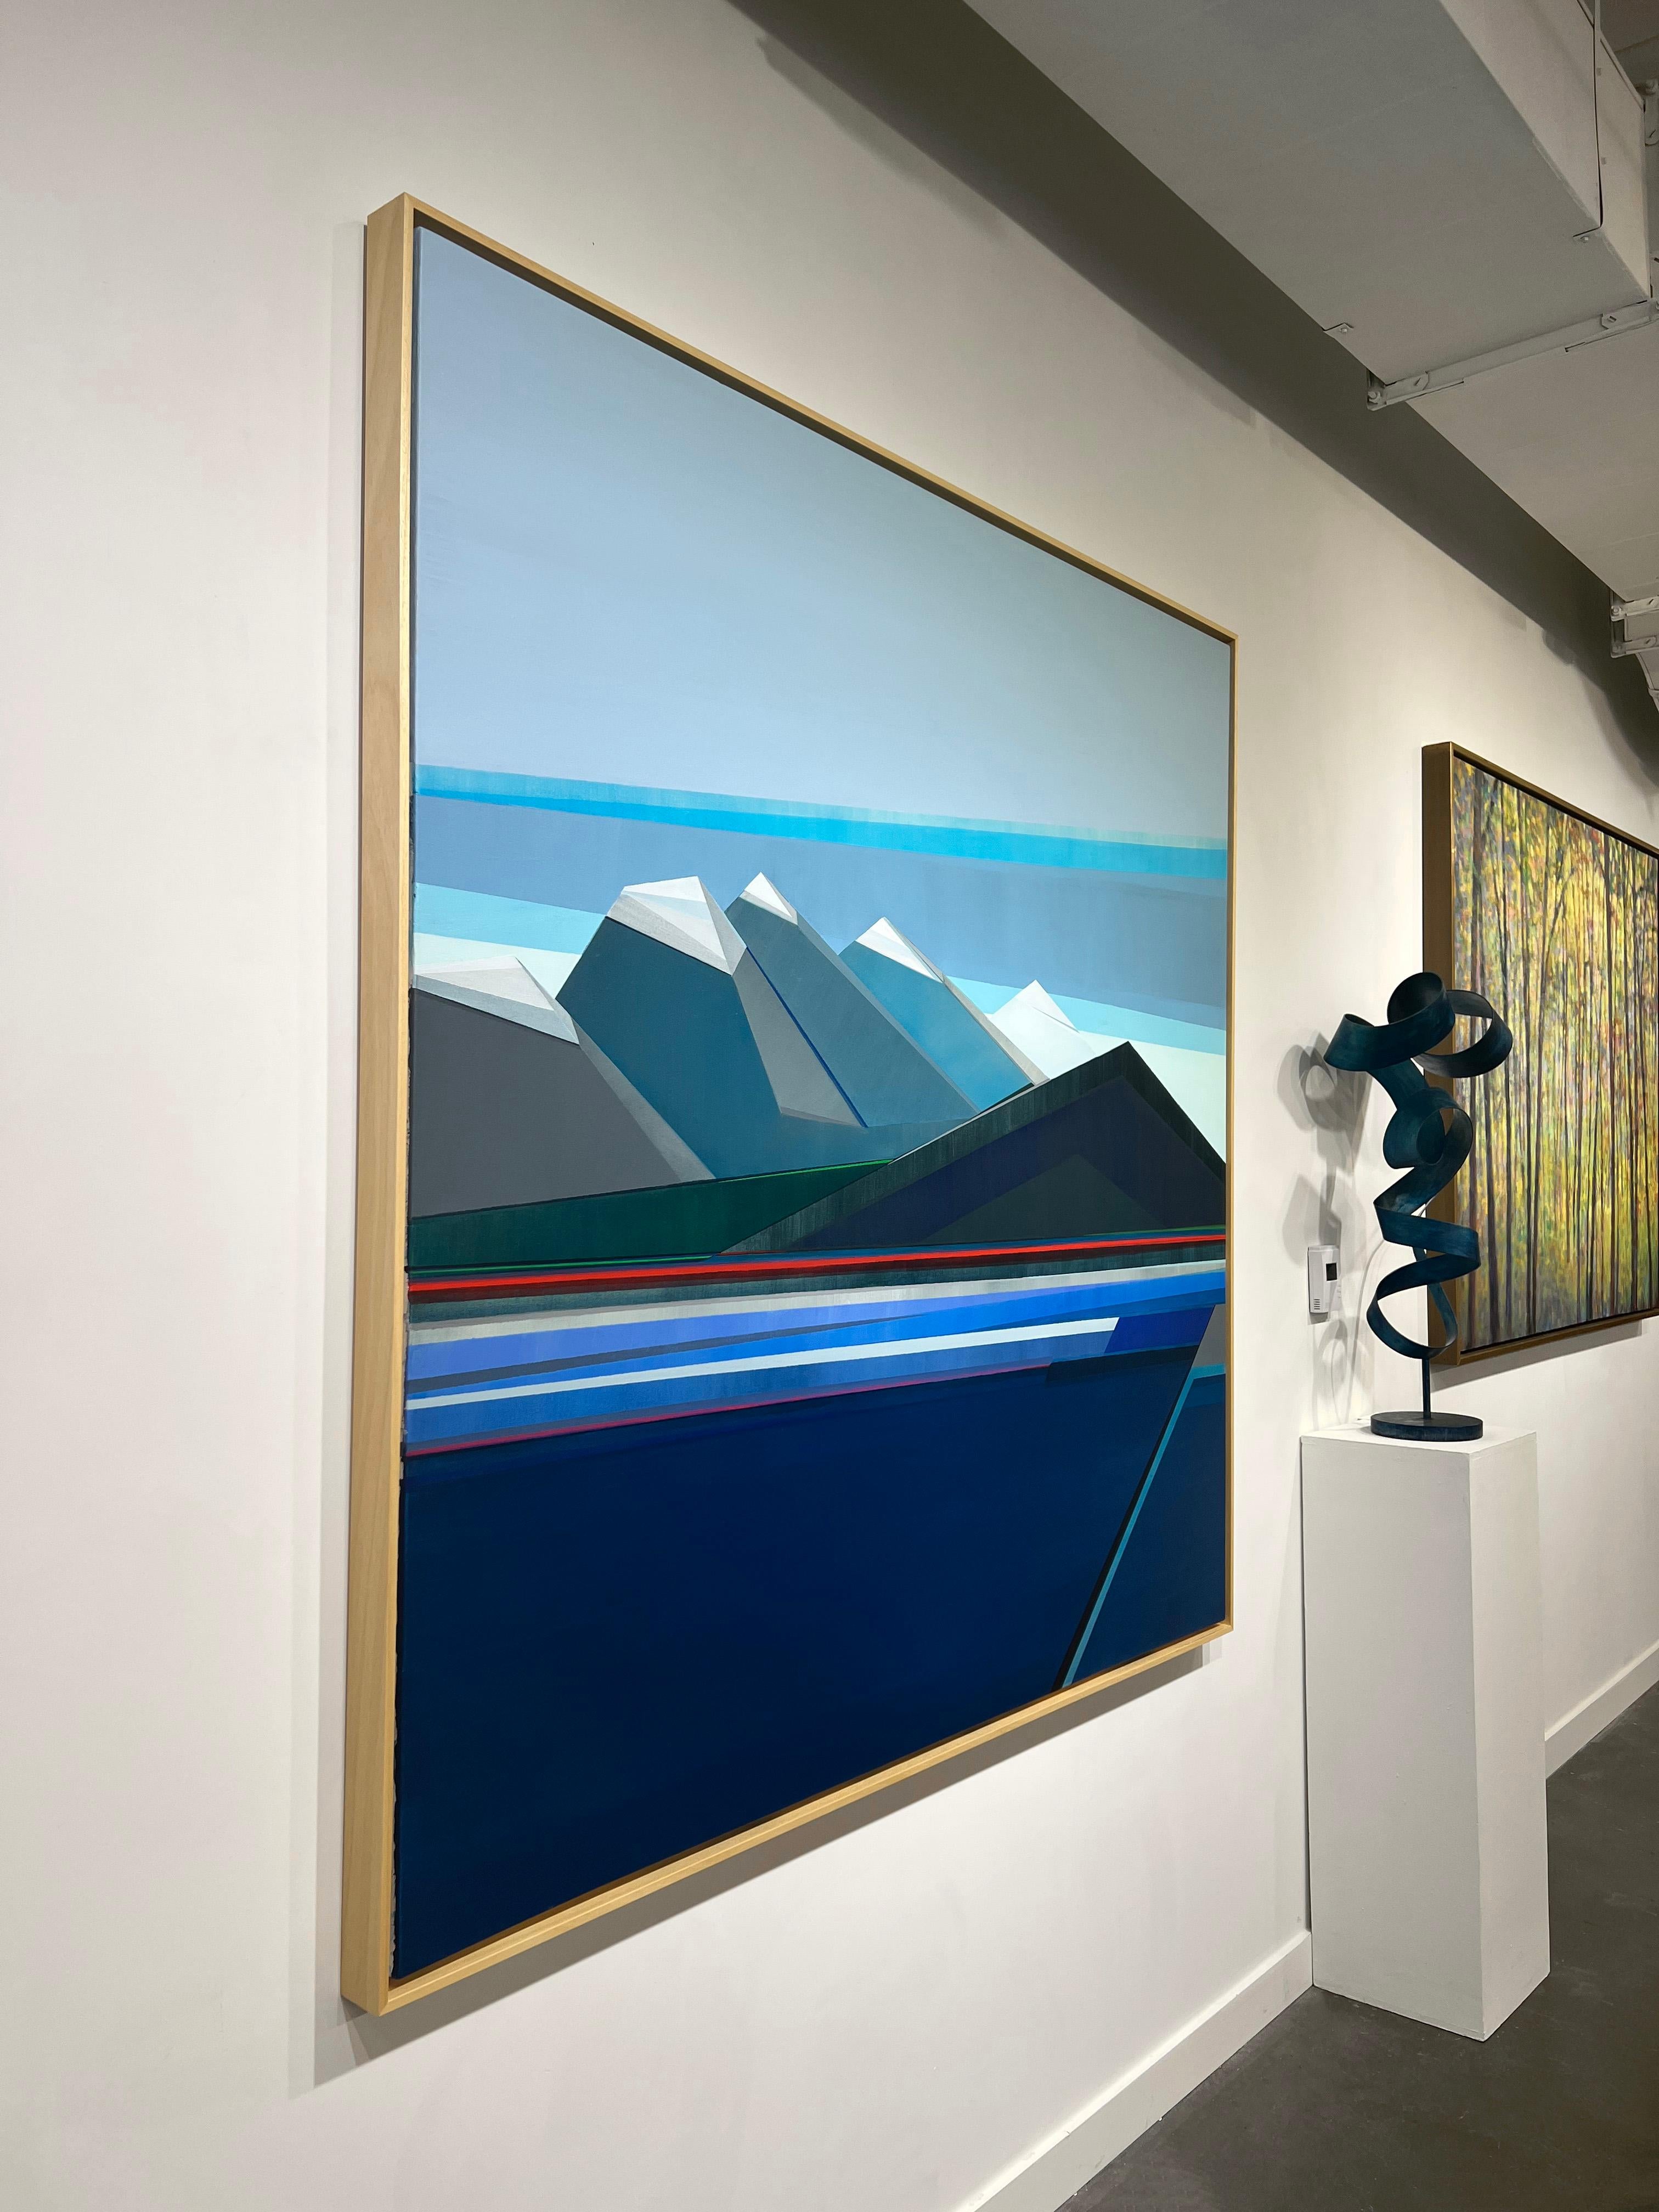 This abstract geometric landscape painting by Shilo Ratner features a cool blue palette. The artist uses her signature geometric shapes and lines to create a mountain range. Different shades of blue, teal, and grey are layered in triangles and